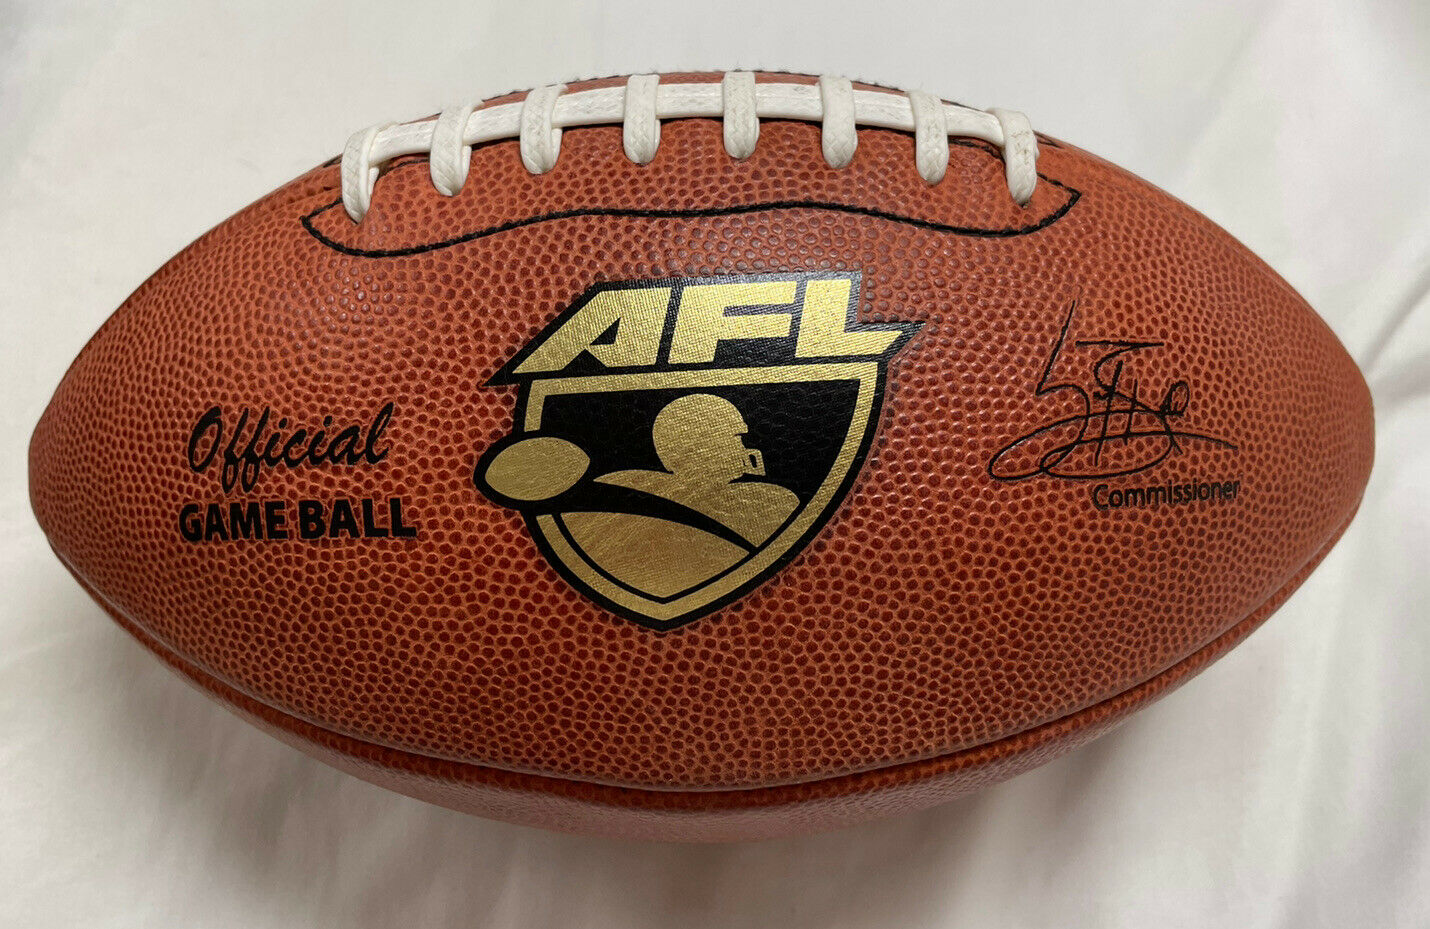 Spalding Leather Afl Arena Football Official Authentic Game Ball